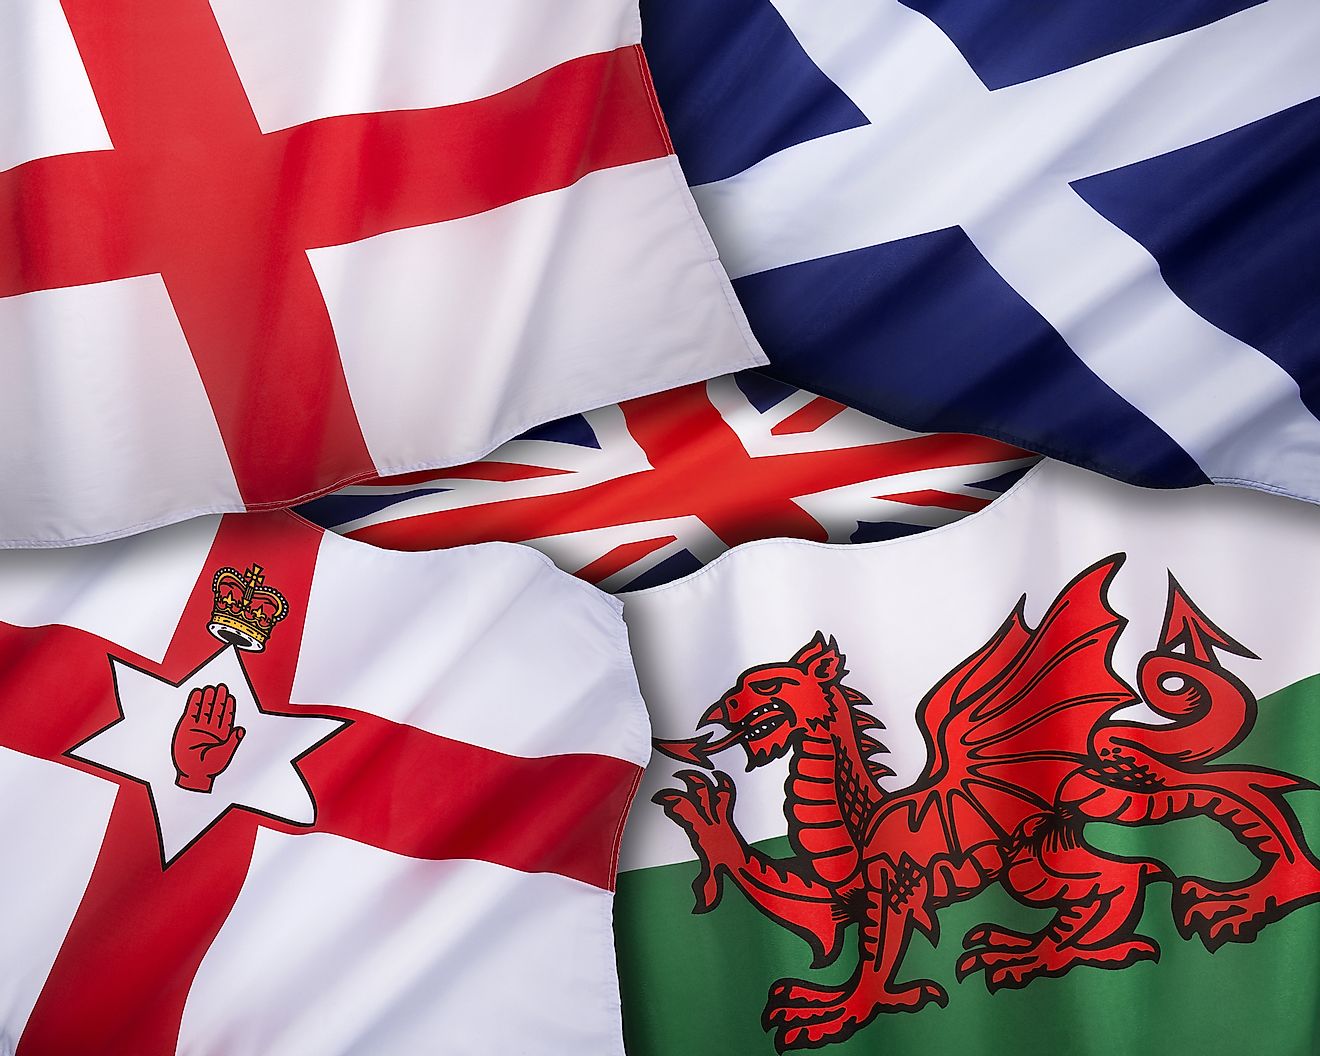 The flags of the United Kingdom of Great Britain - England, Scotland, Wales and Northern Ireland. Image credit: Steve Allen/Shutterstock.com